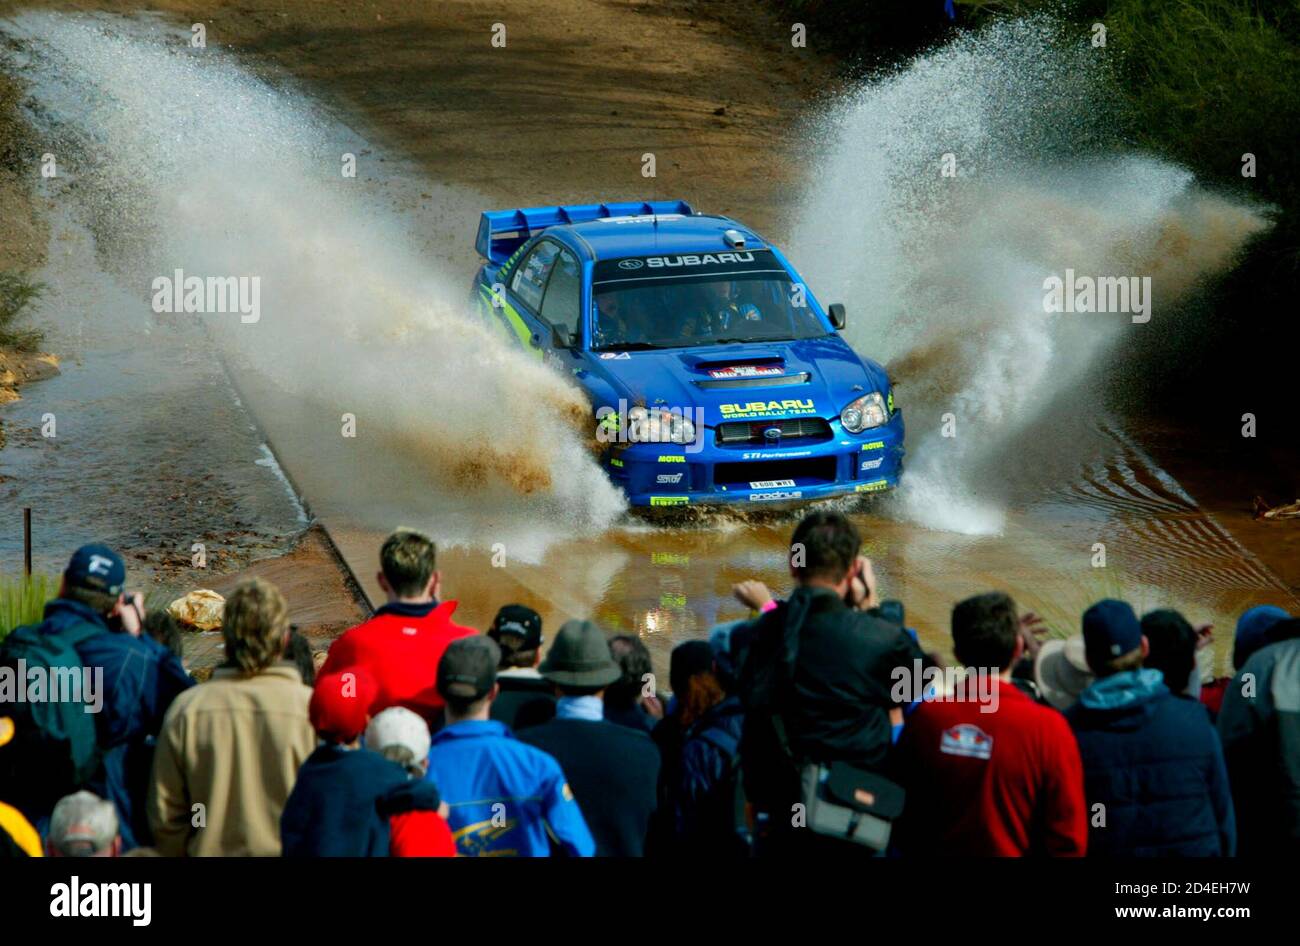 Norway's Petter Solberg in action on stage 21 of the Rally of Australia in Perth, Western Australia September 7, 2003. Solberg finished first ahead of France's Sebastien Loeb and Great Britain's Richard Burns in second and third position respectively. REUTERS/Mal Fairclough  MF/TW Stock Photo